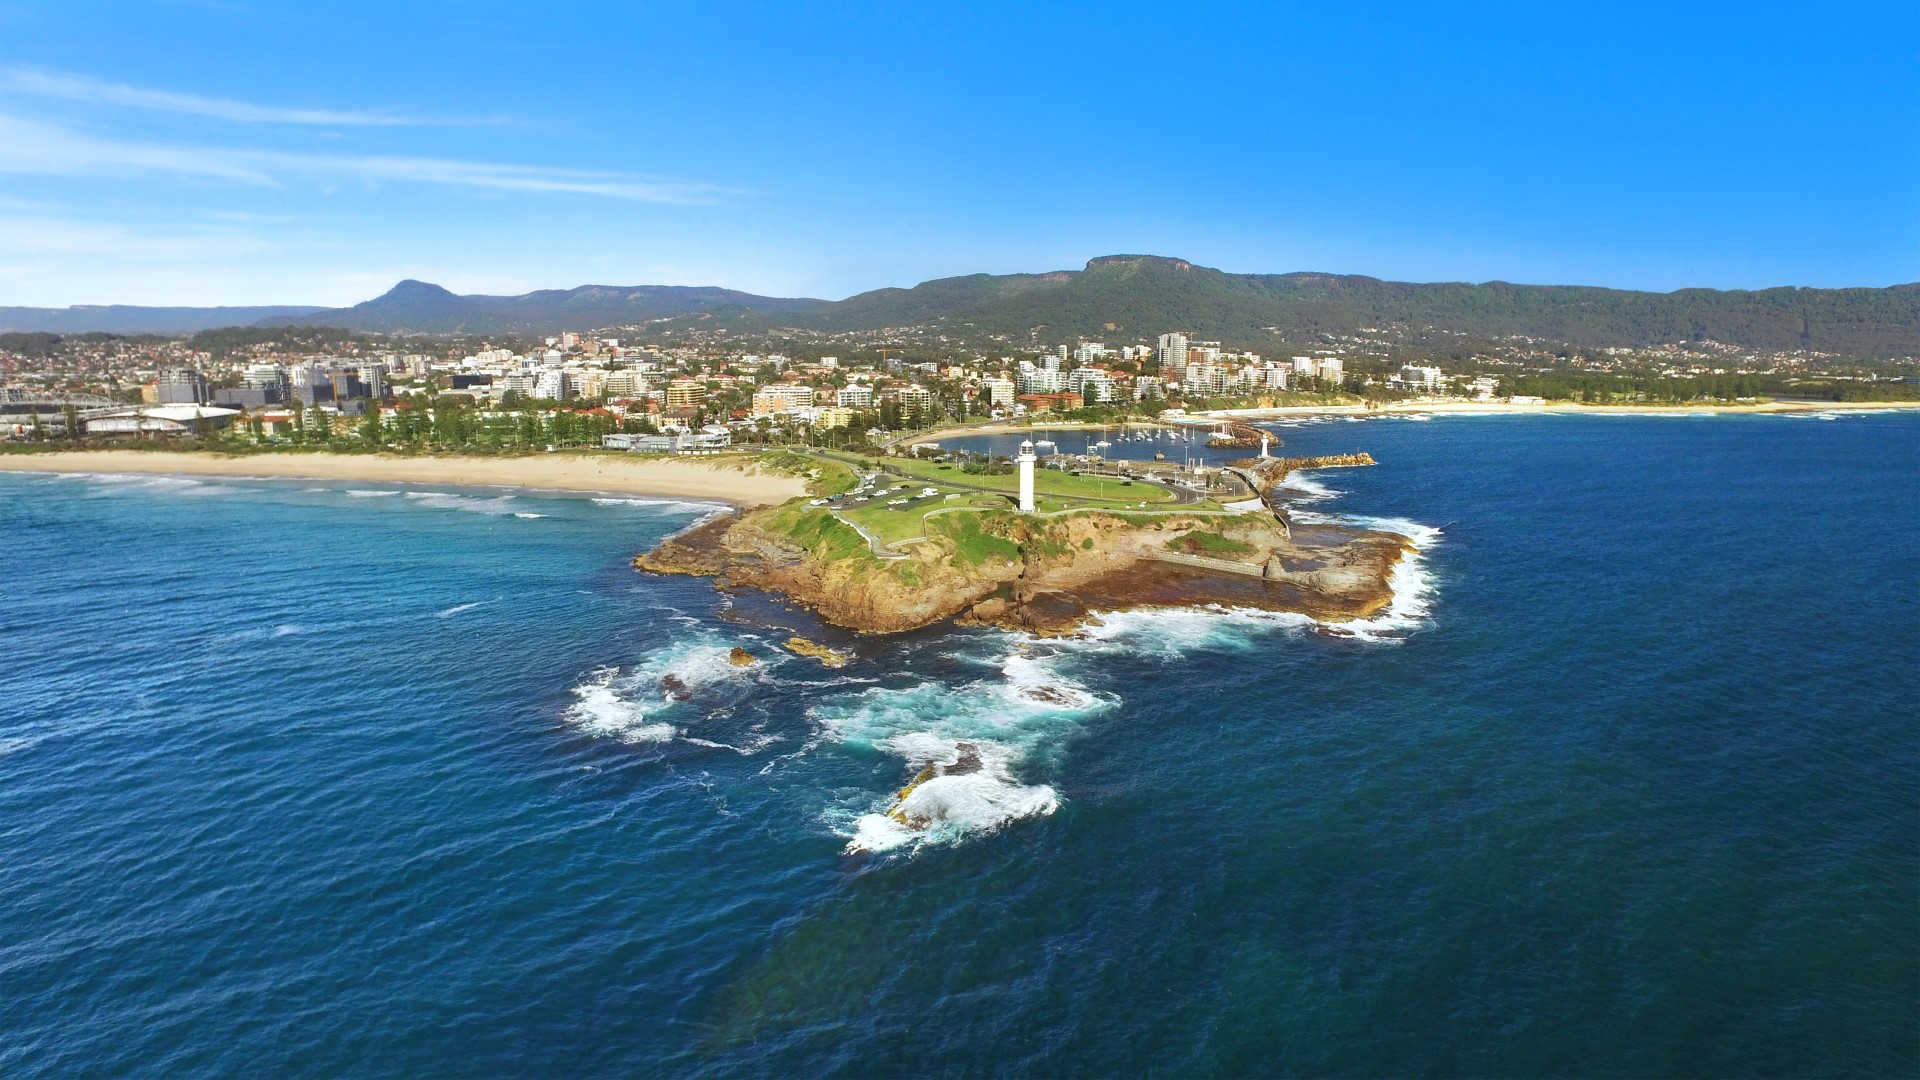 "It's not where I thought we’d end up". - Wollongong Real Estate Market.